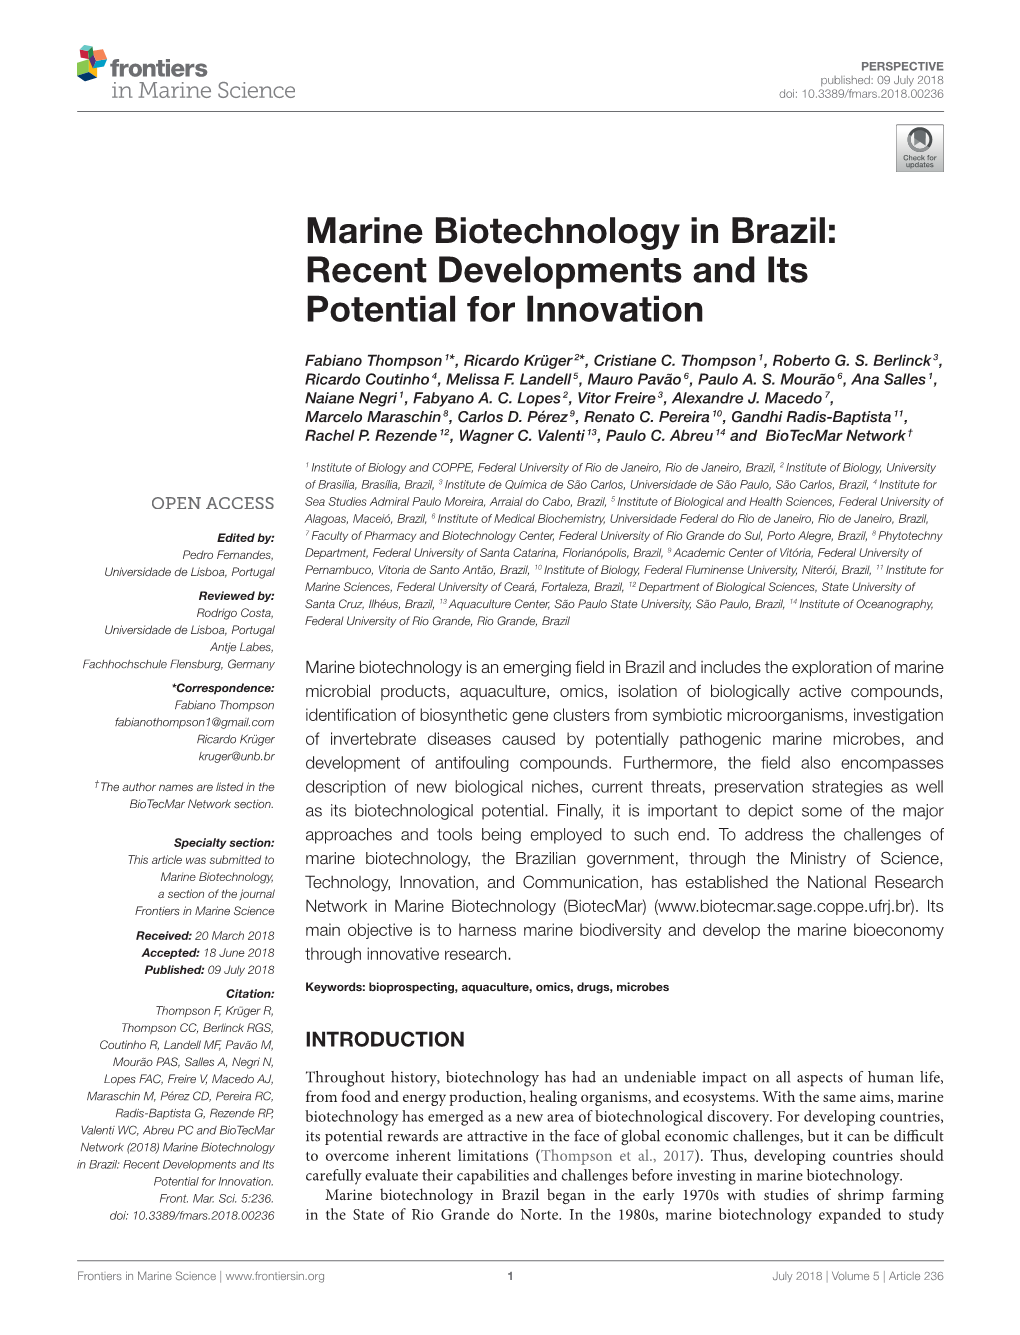 Marine Biotechnology in Brazil: Recent Developments and Its Potential for Innovation